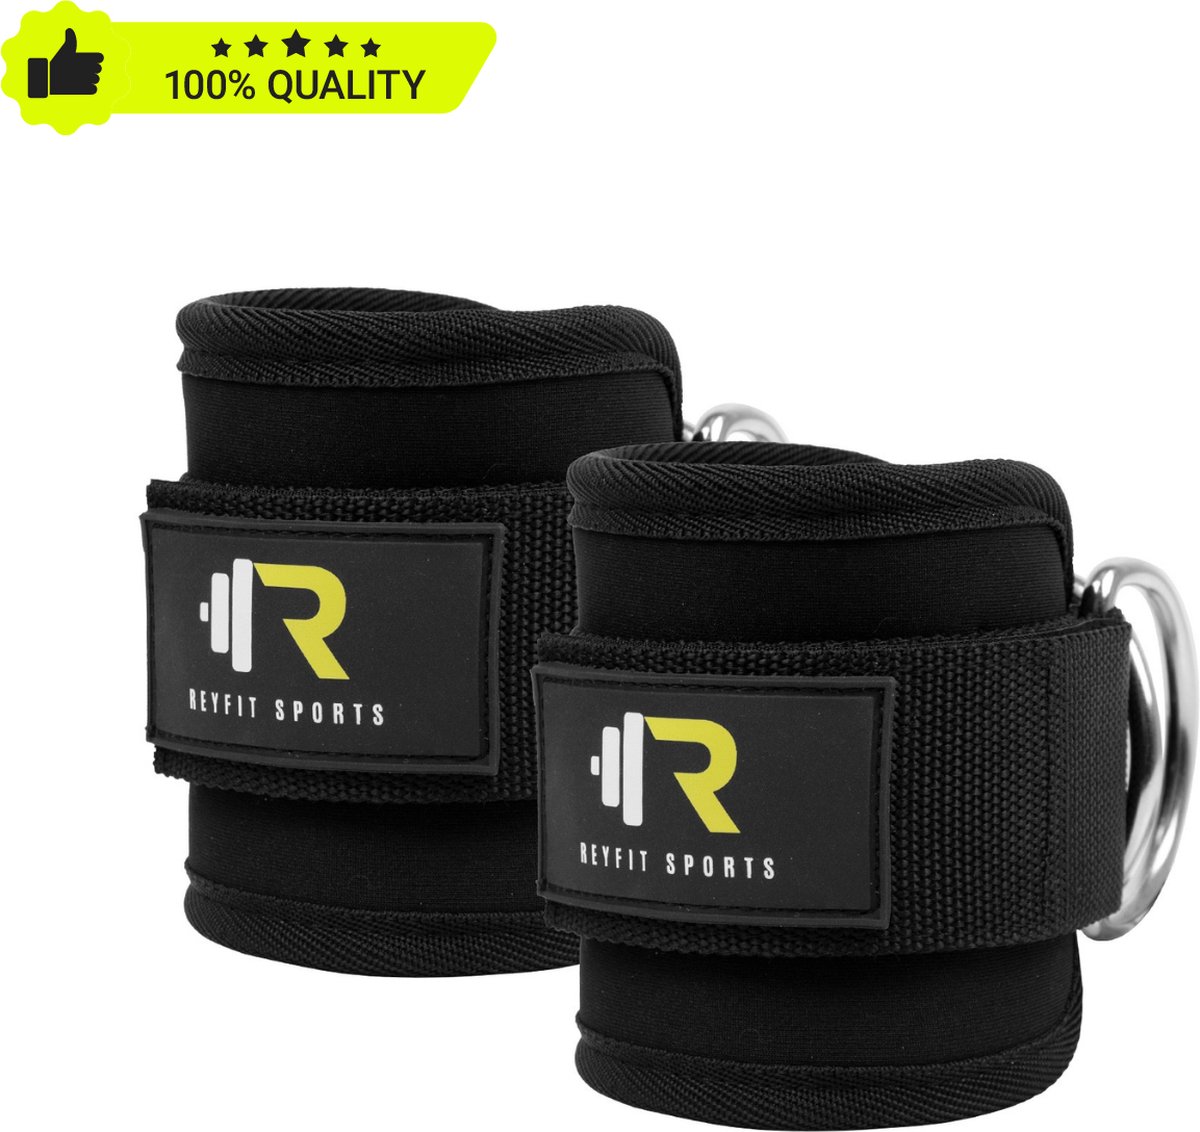 ReyFit Sports 2x Ankle Straps Fitness - Enkelband Fitness - Fitness Accessoires - Ankle Cuff Straps - Zwart